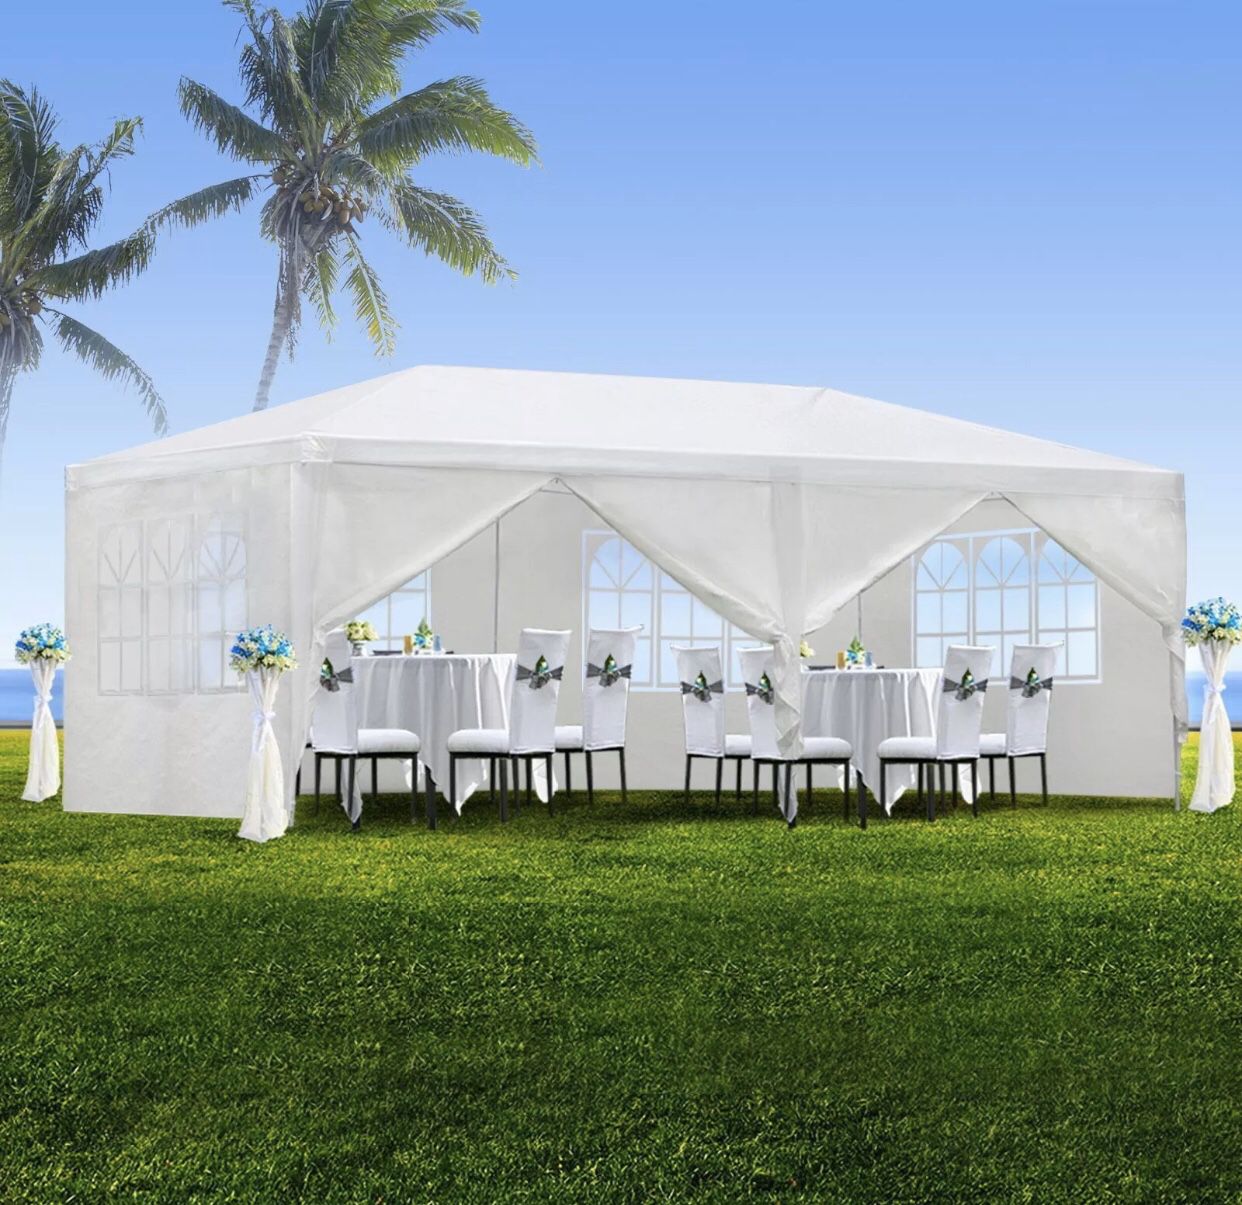 10'x20' Canopy Party BBQ Outdoor Canopy Party Waterproof Wedding Tent White Gazebo Pavilion W/6 Side Walls